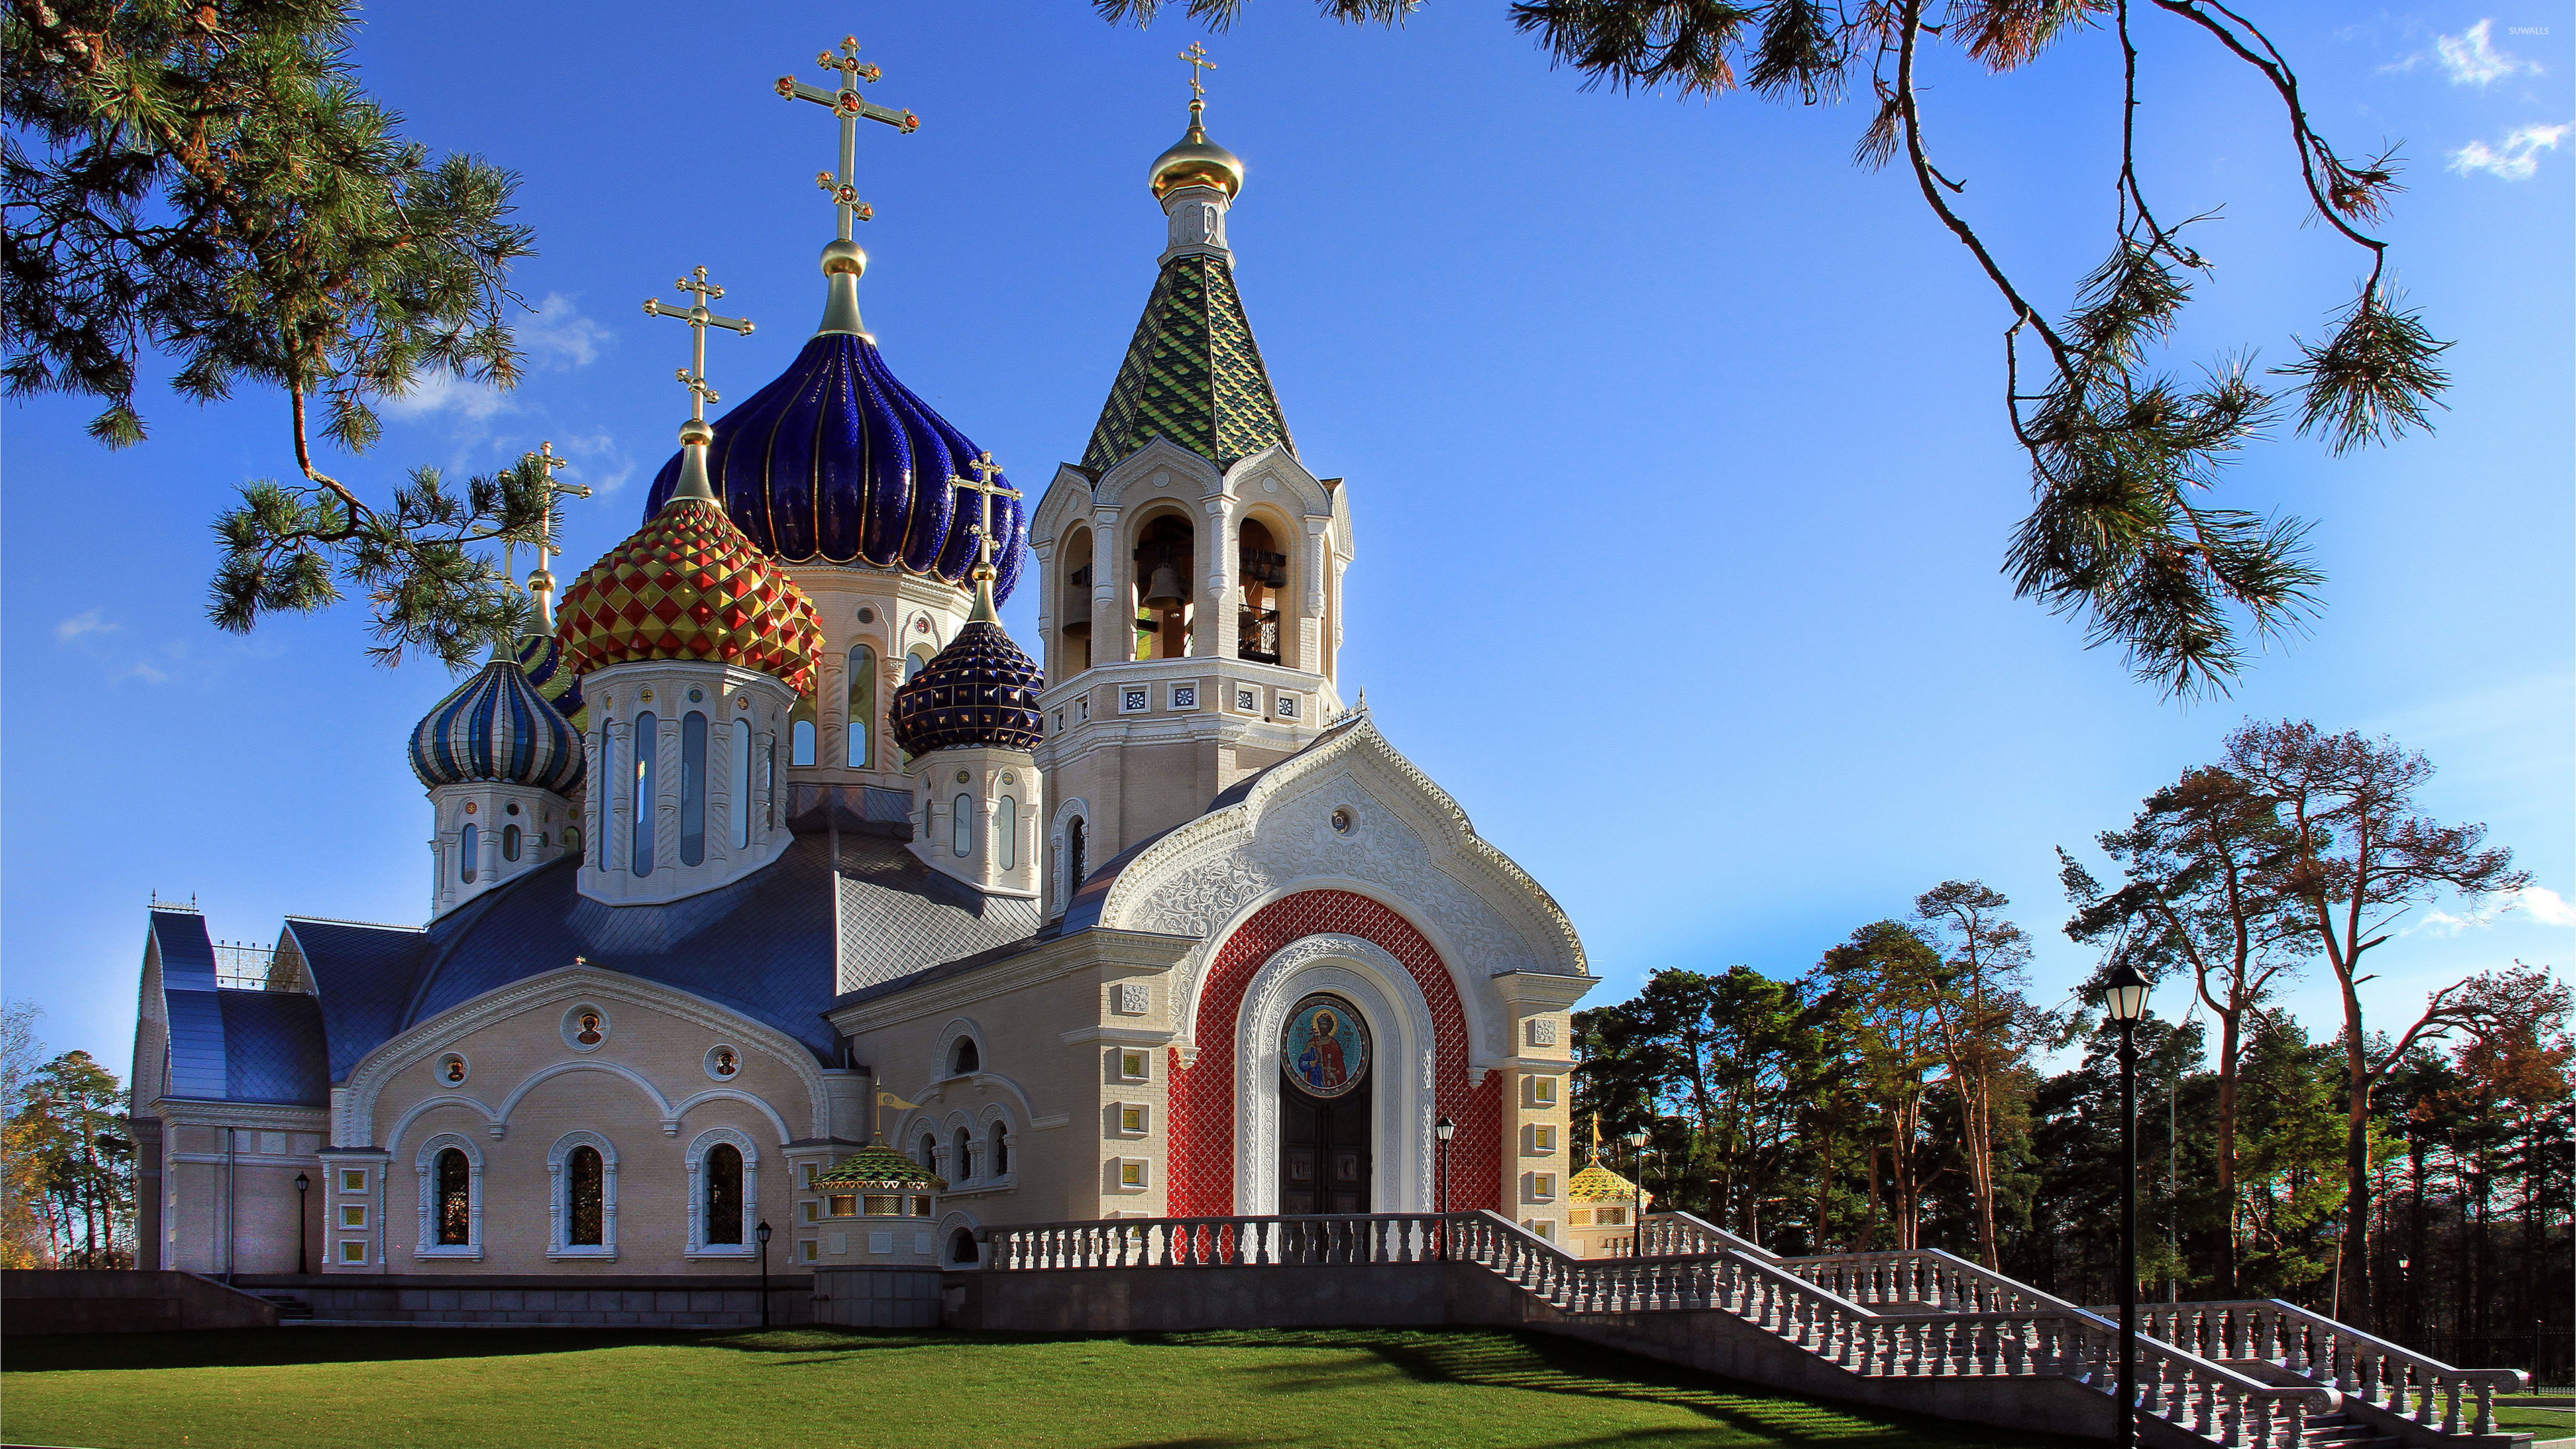 Colorful domes on a orthodox church wallpaper wallpaper